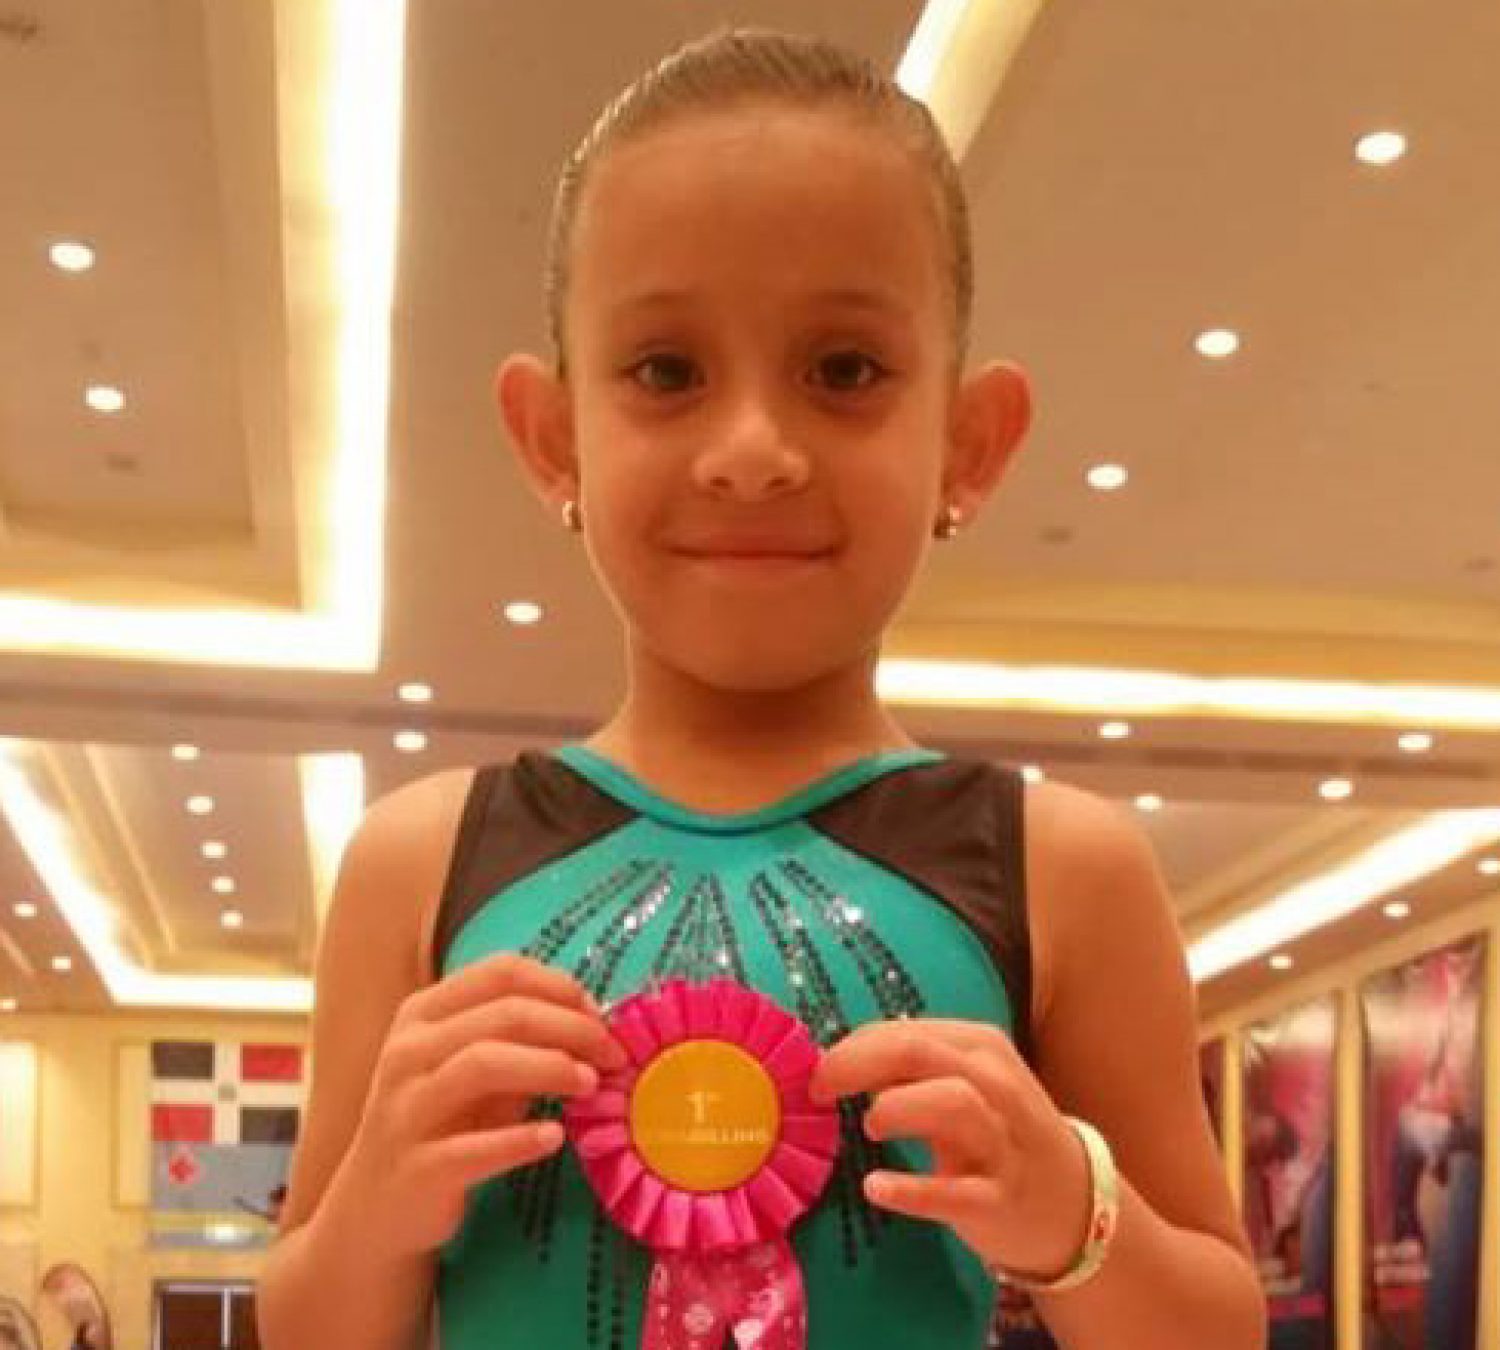 Congratulations Sofia Chaclán!  obtained 1st Place in Copa Gilling, Cancun Mexico